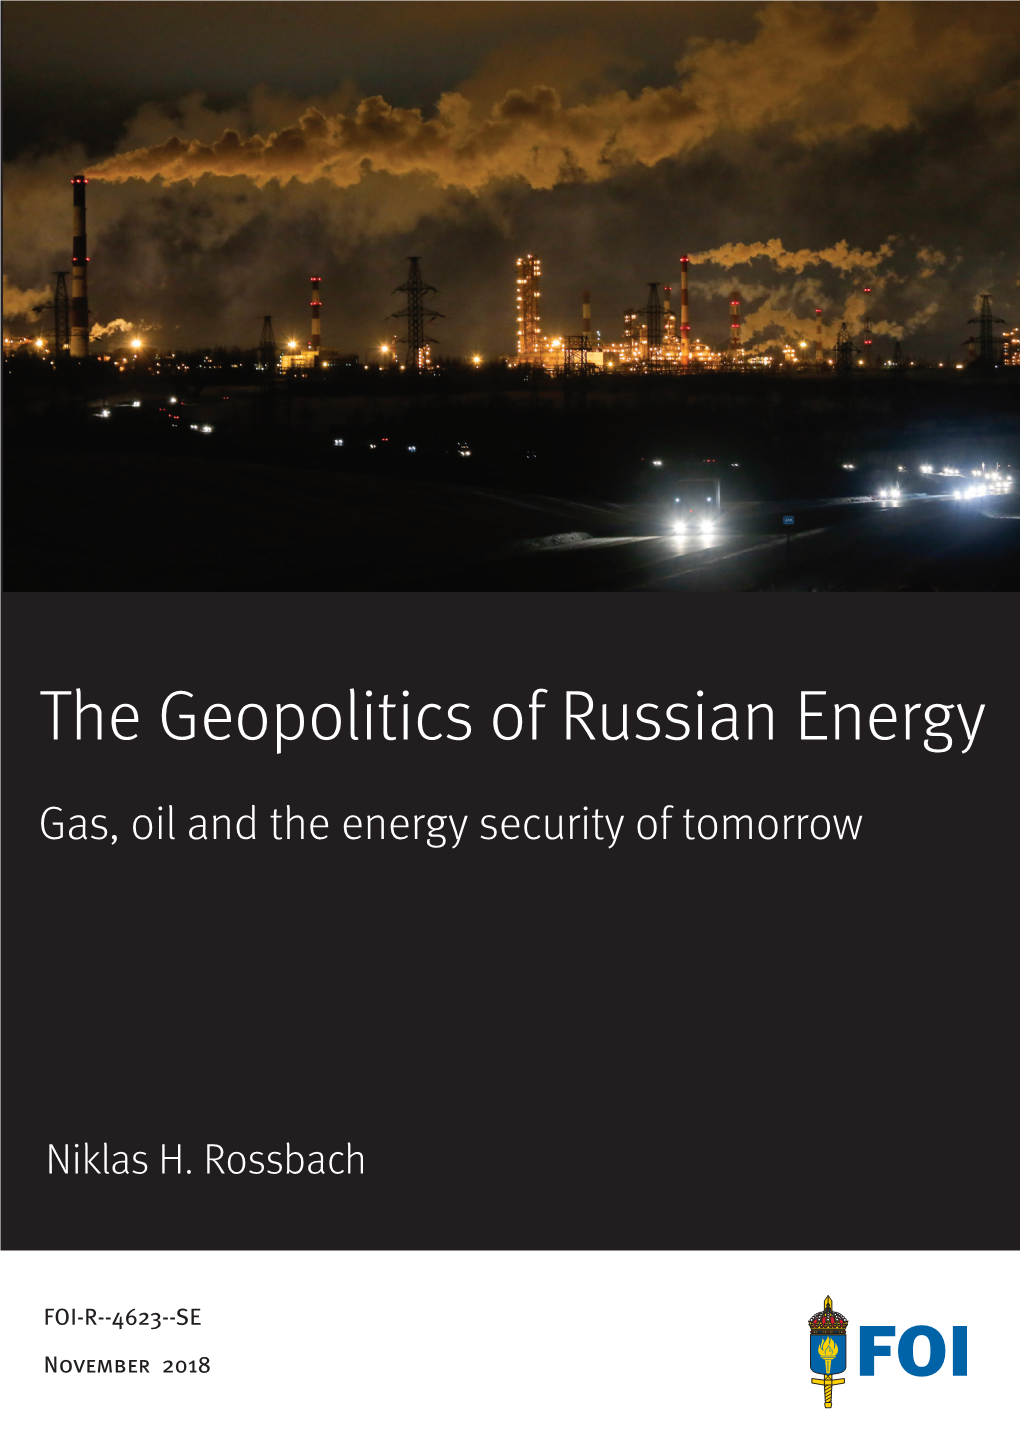 The Geopolitics of Russian Energy Against the Background of Changing International Power Politics and Challenges for Energy Security